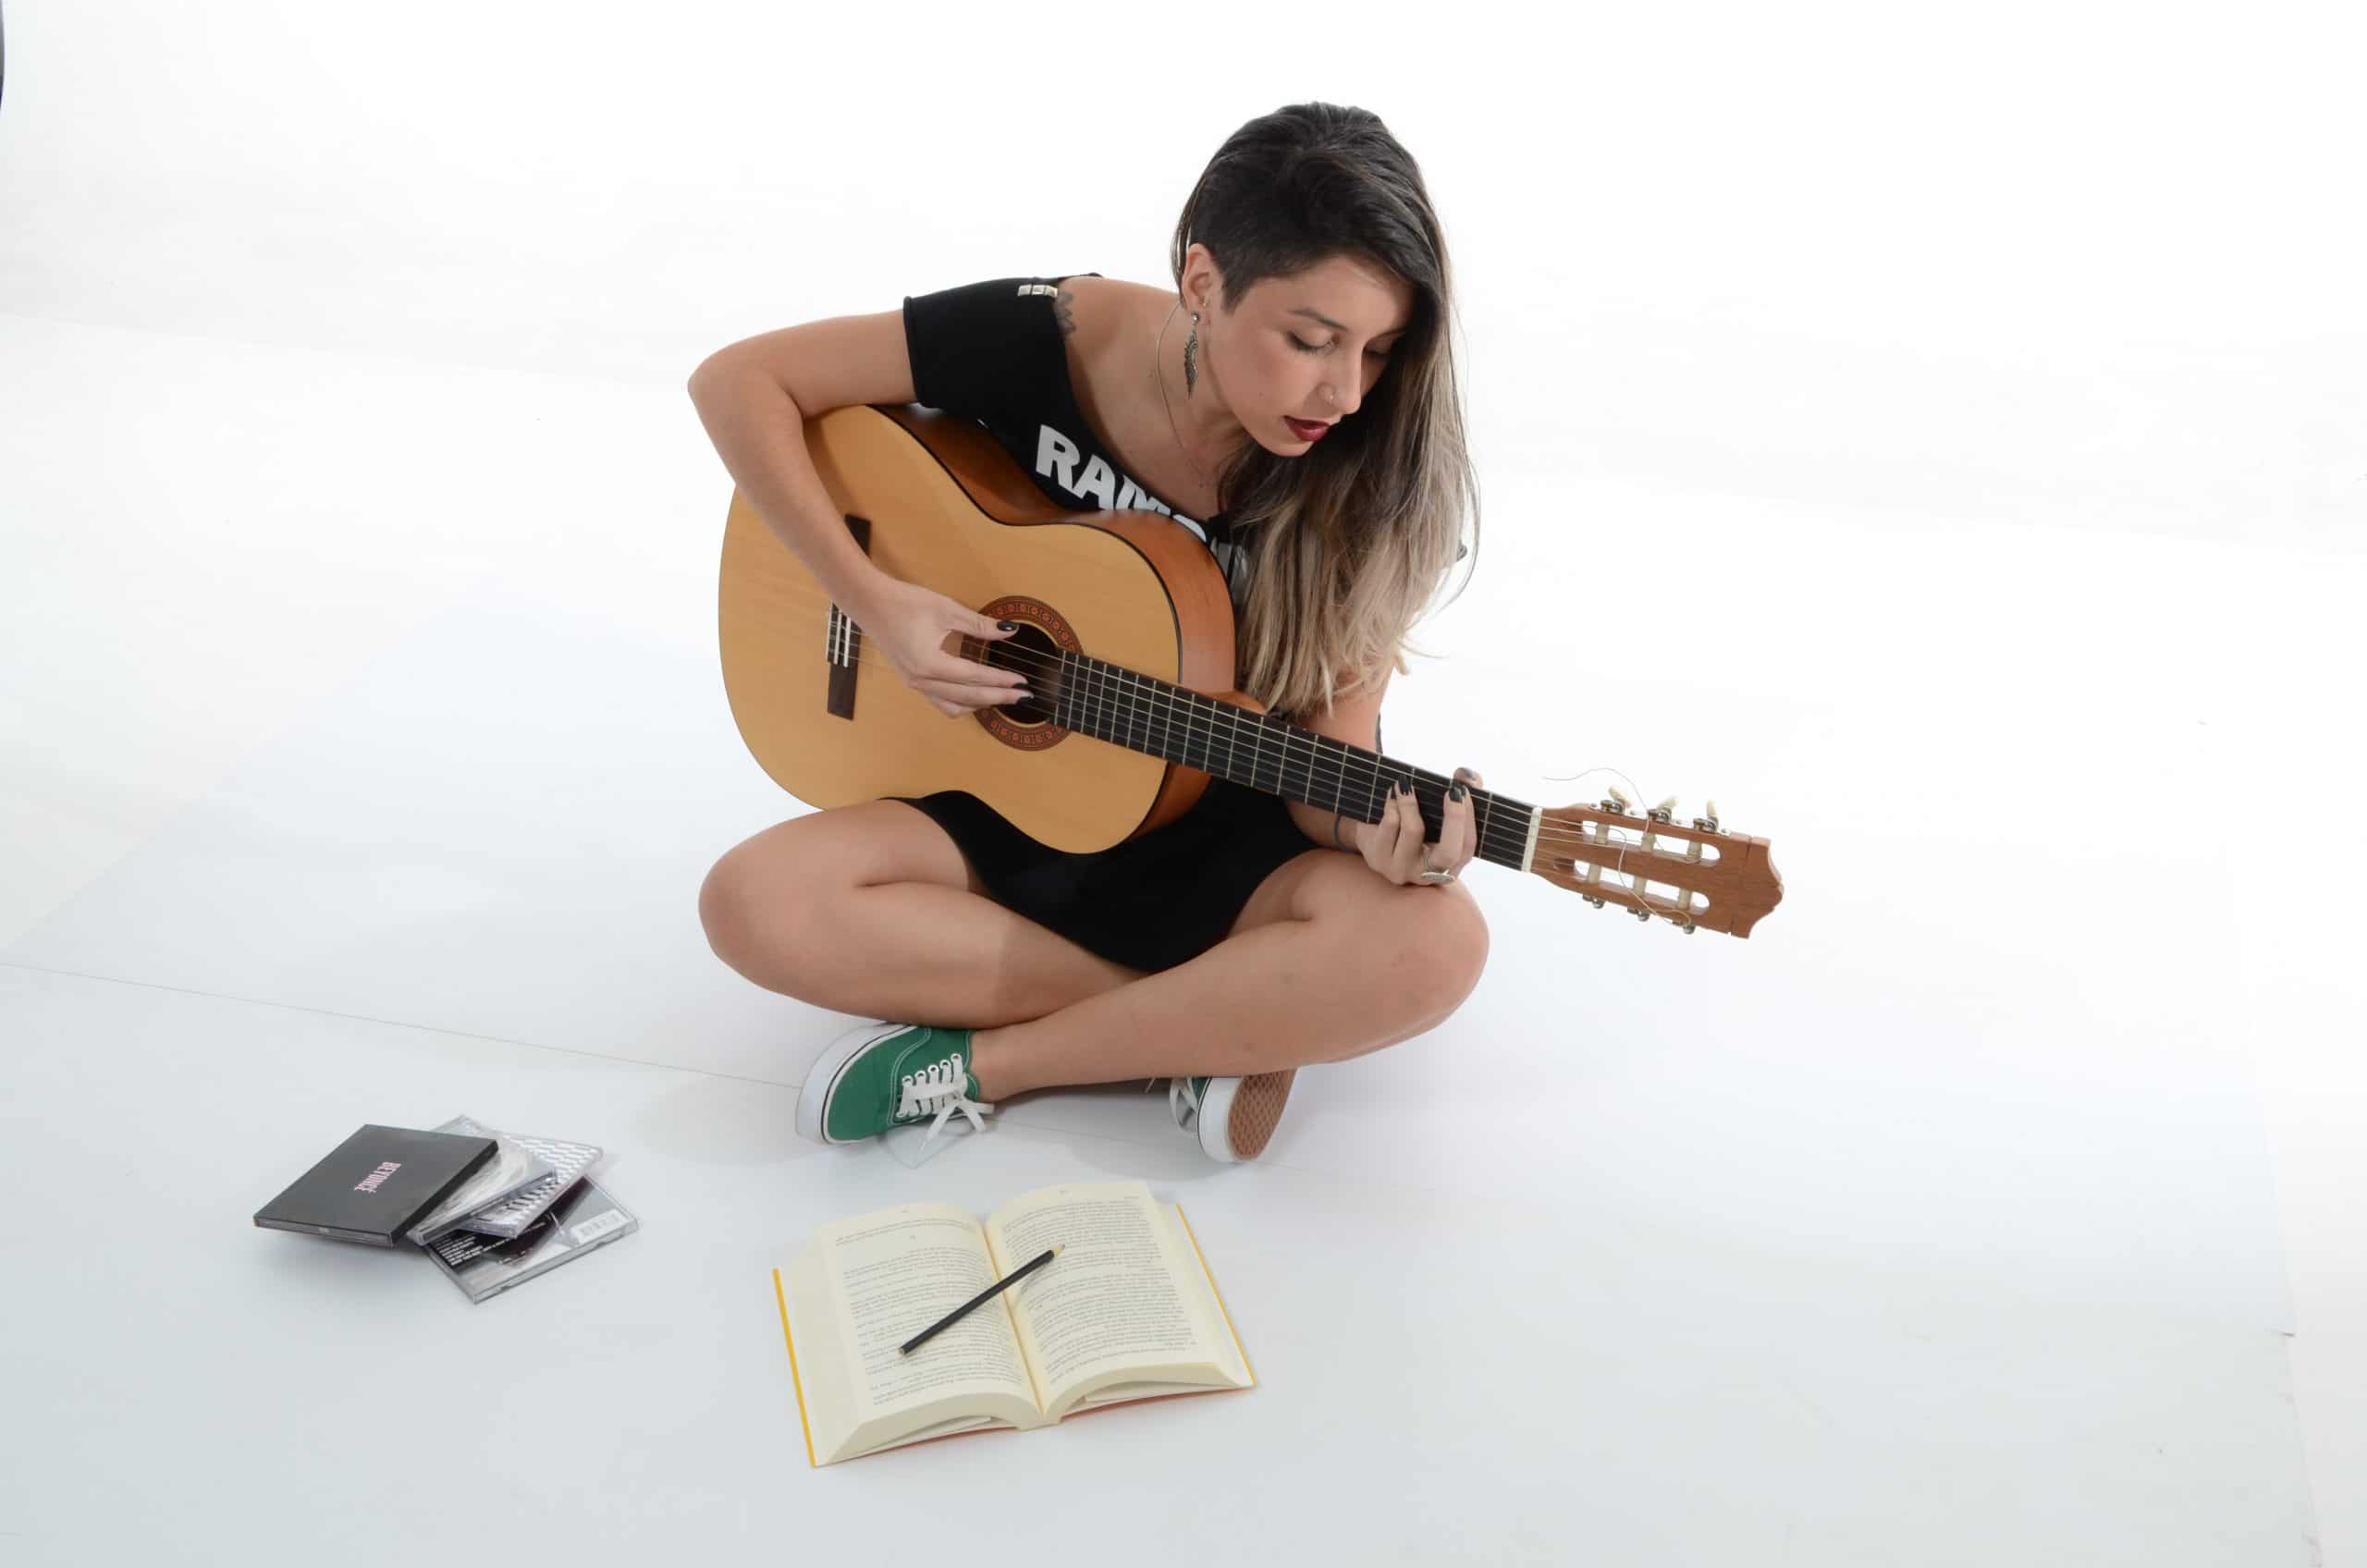 The Most Profitable Niches For Affiliate Marketing - Playing a Guitar